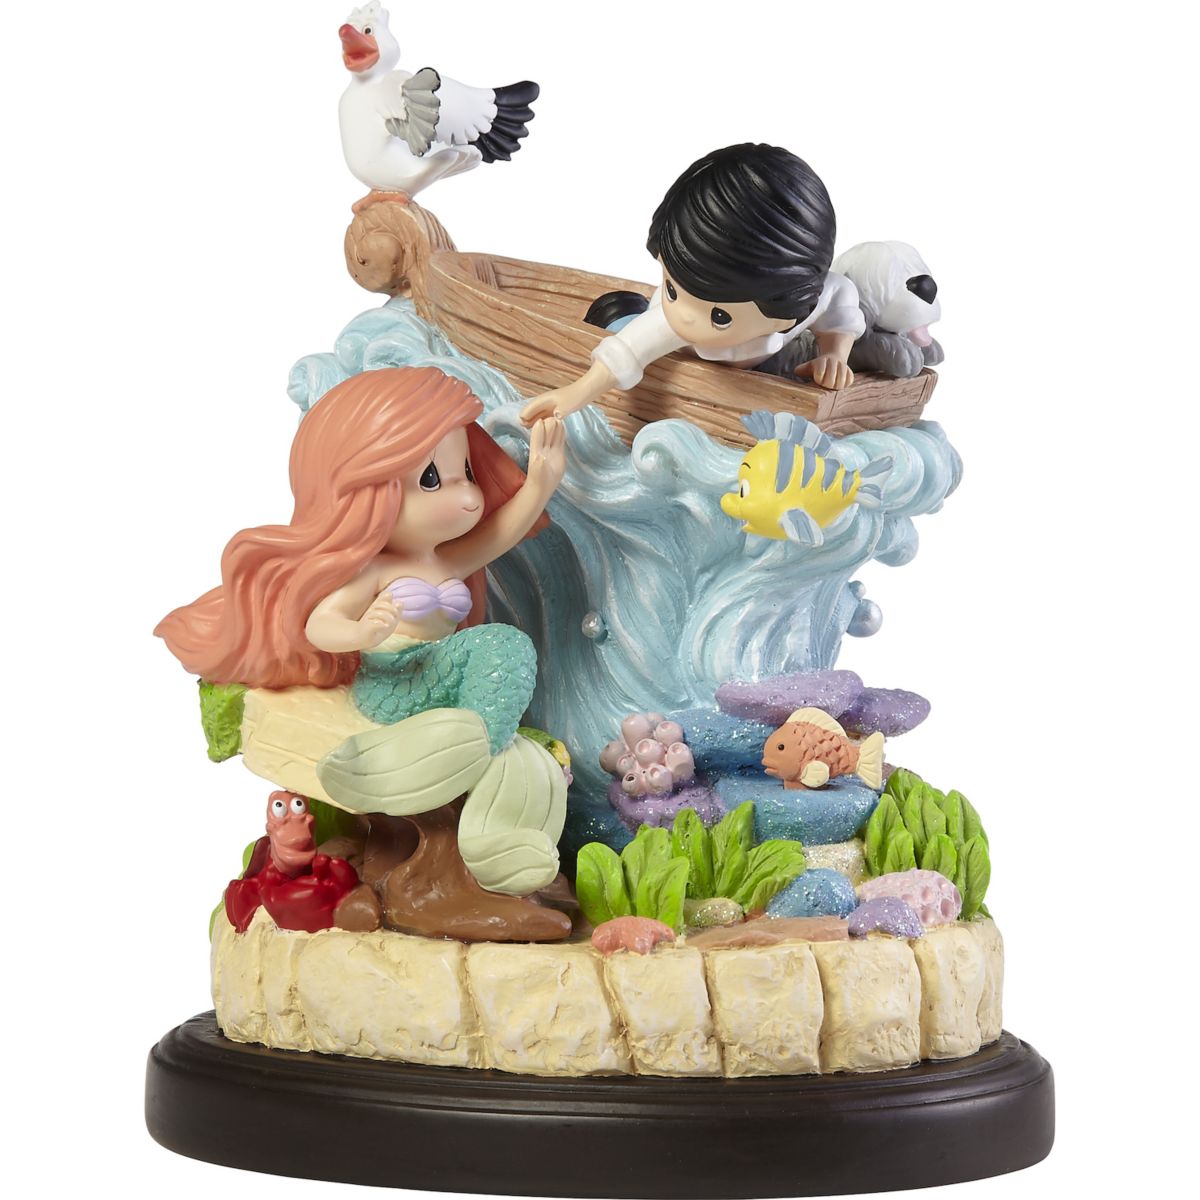 Disney The Little Mermaid Our Worlds Together Музыкальный декор для стола от Precious Moments Precious Moments